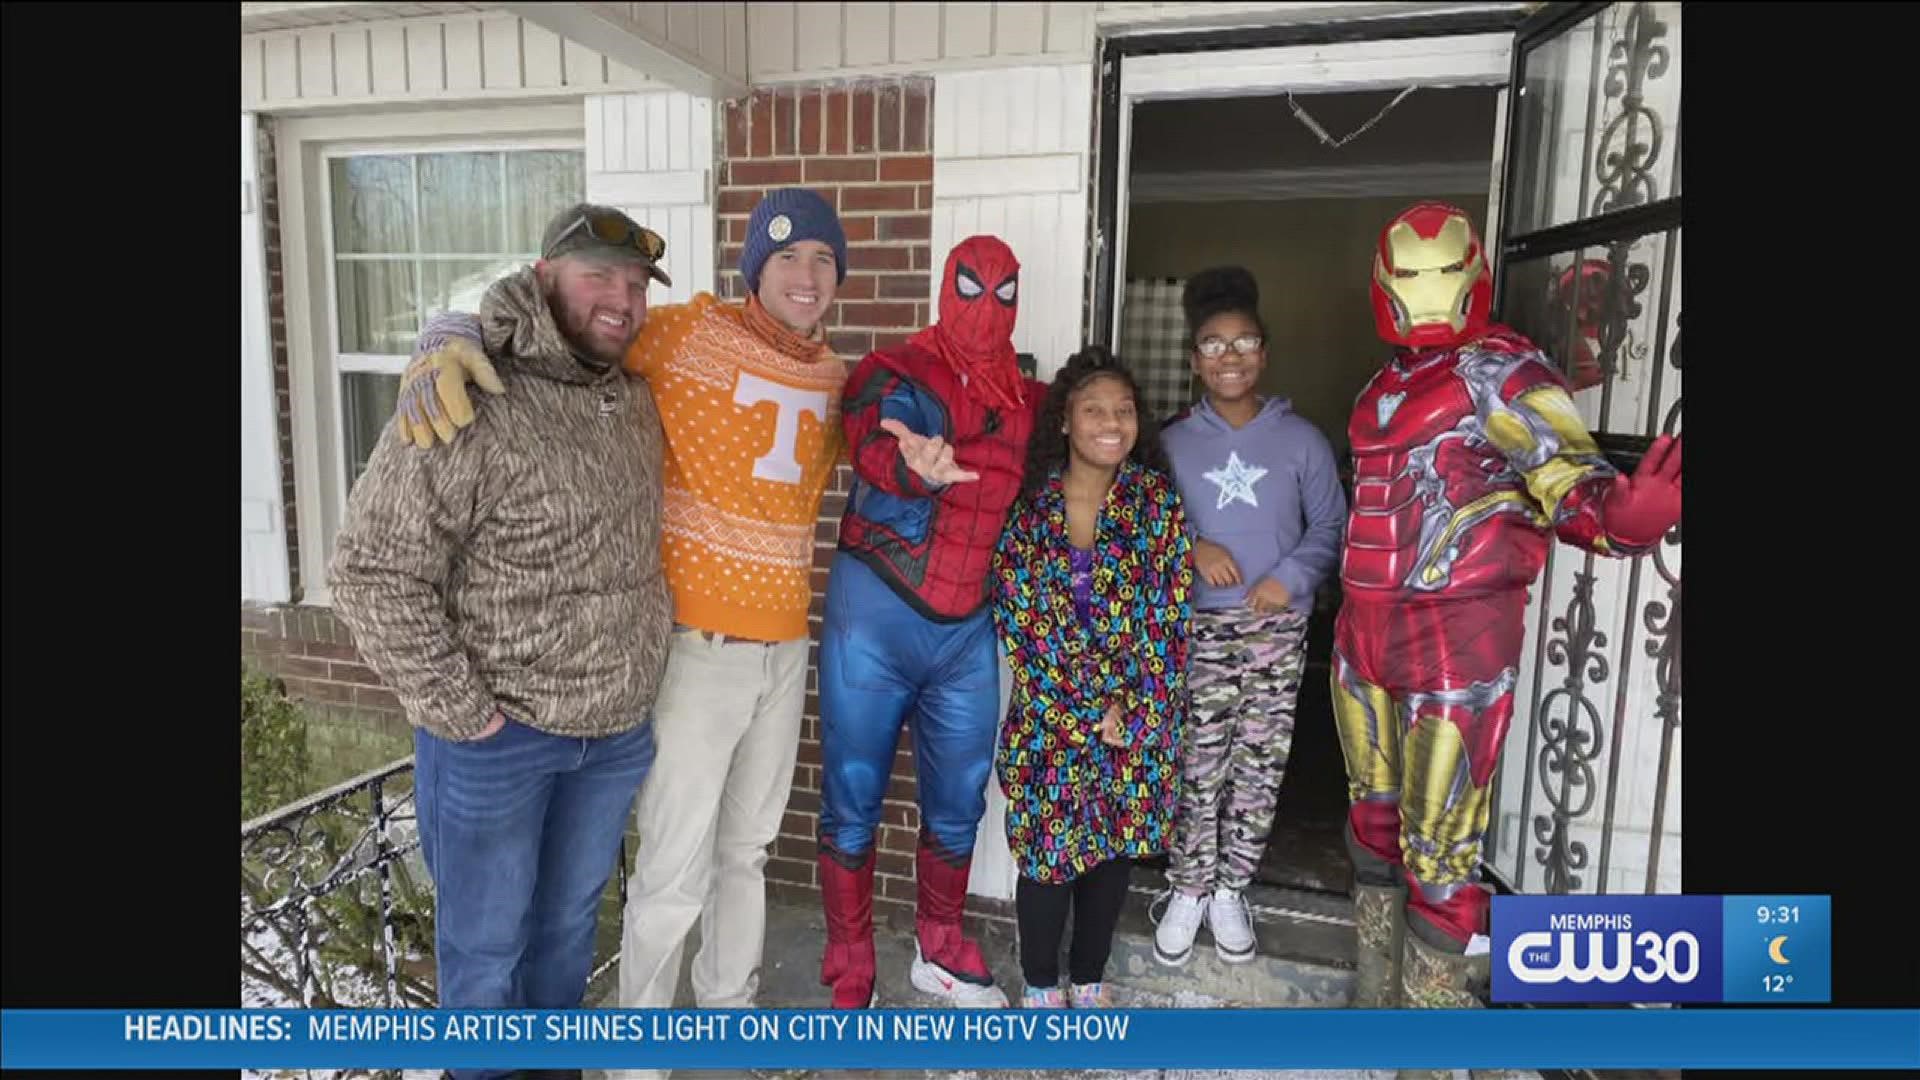 Volunteers with My Town Miracles delivered gifts to 85 families – that’s 210 children in several Memphis areas, including Orange Mound, Bethel Grove, and more.